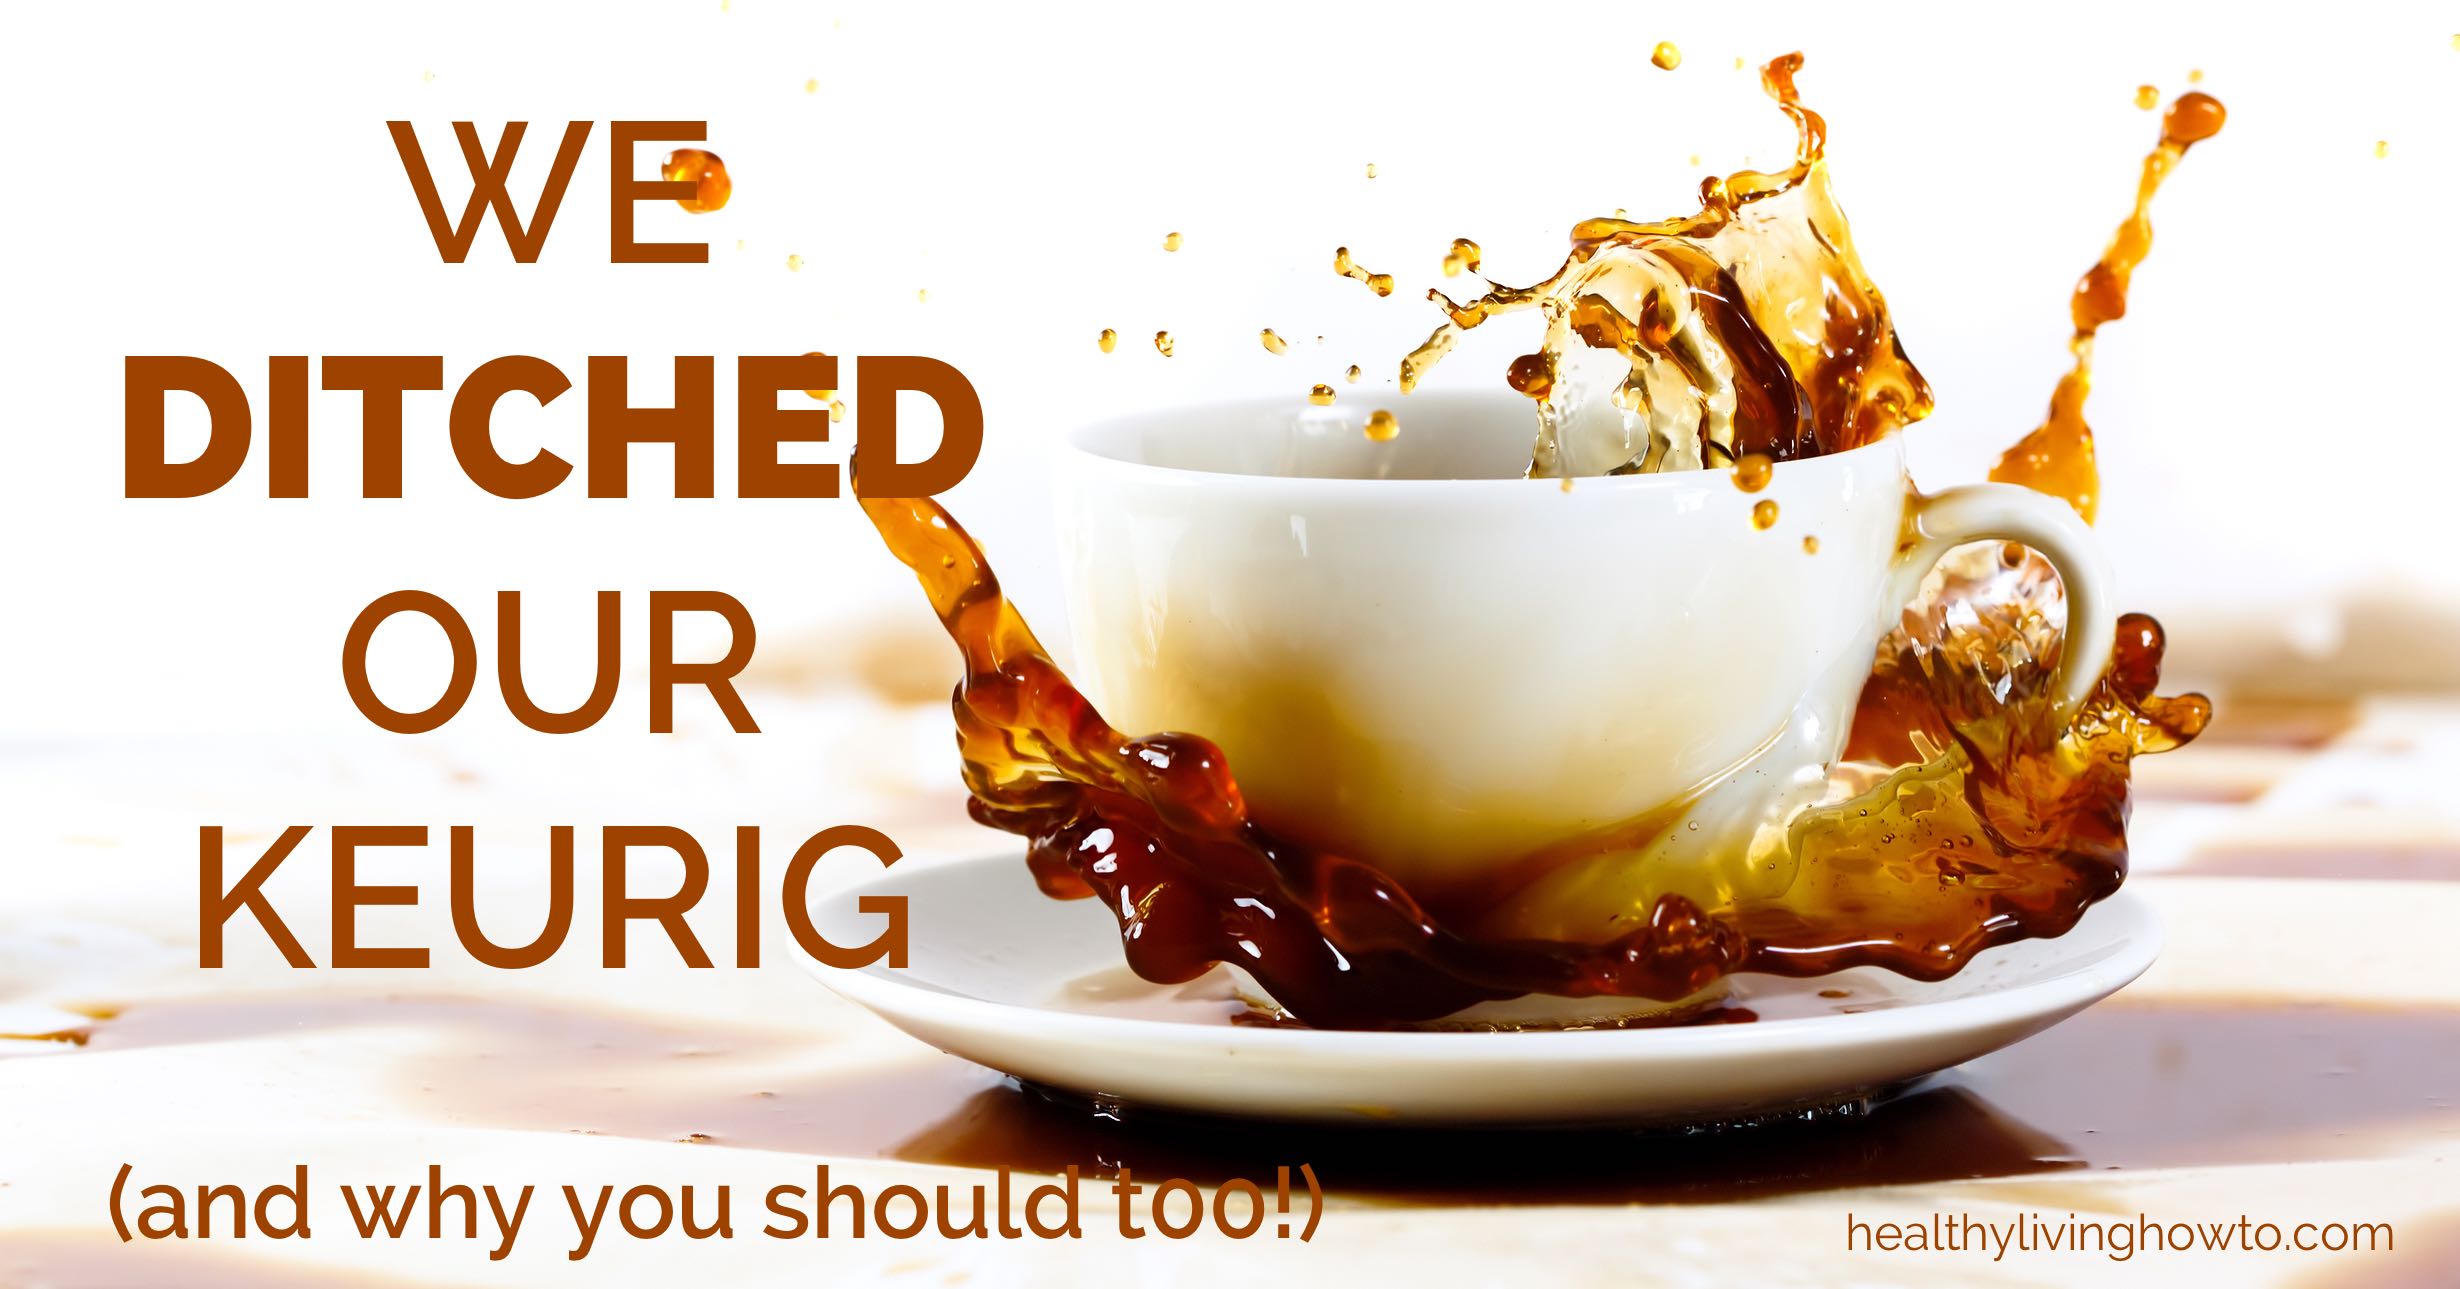 We Ditched Our Keurig | healthylivinghowto.com